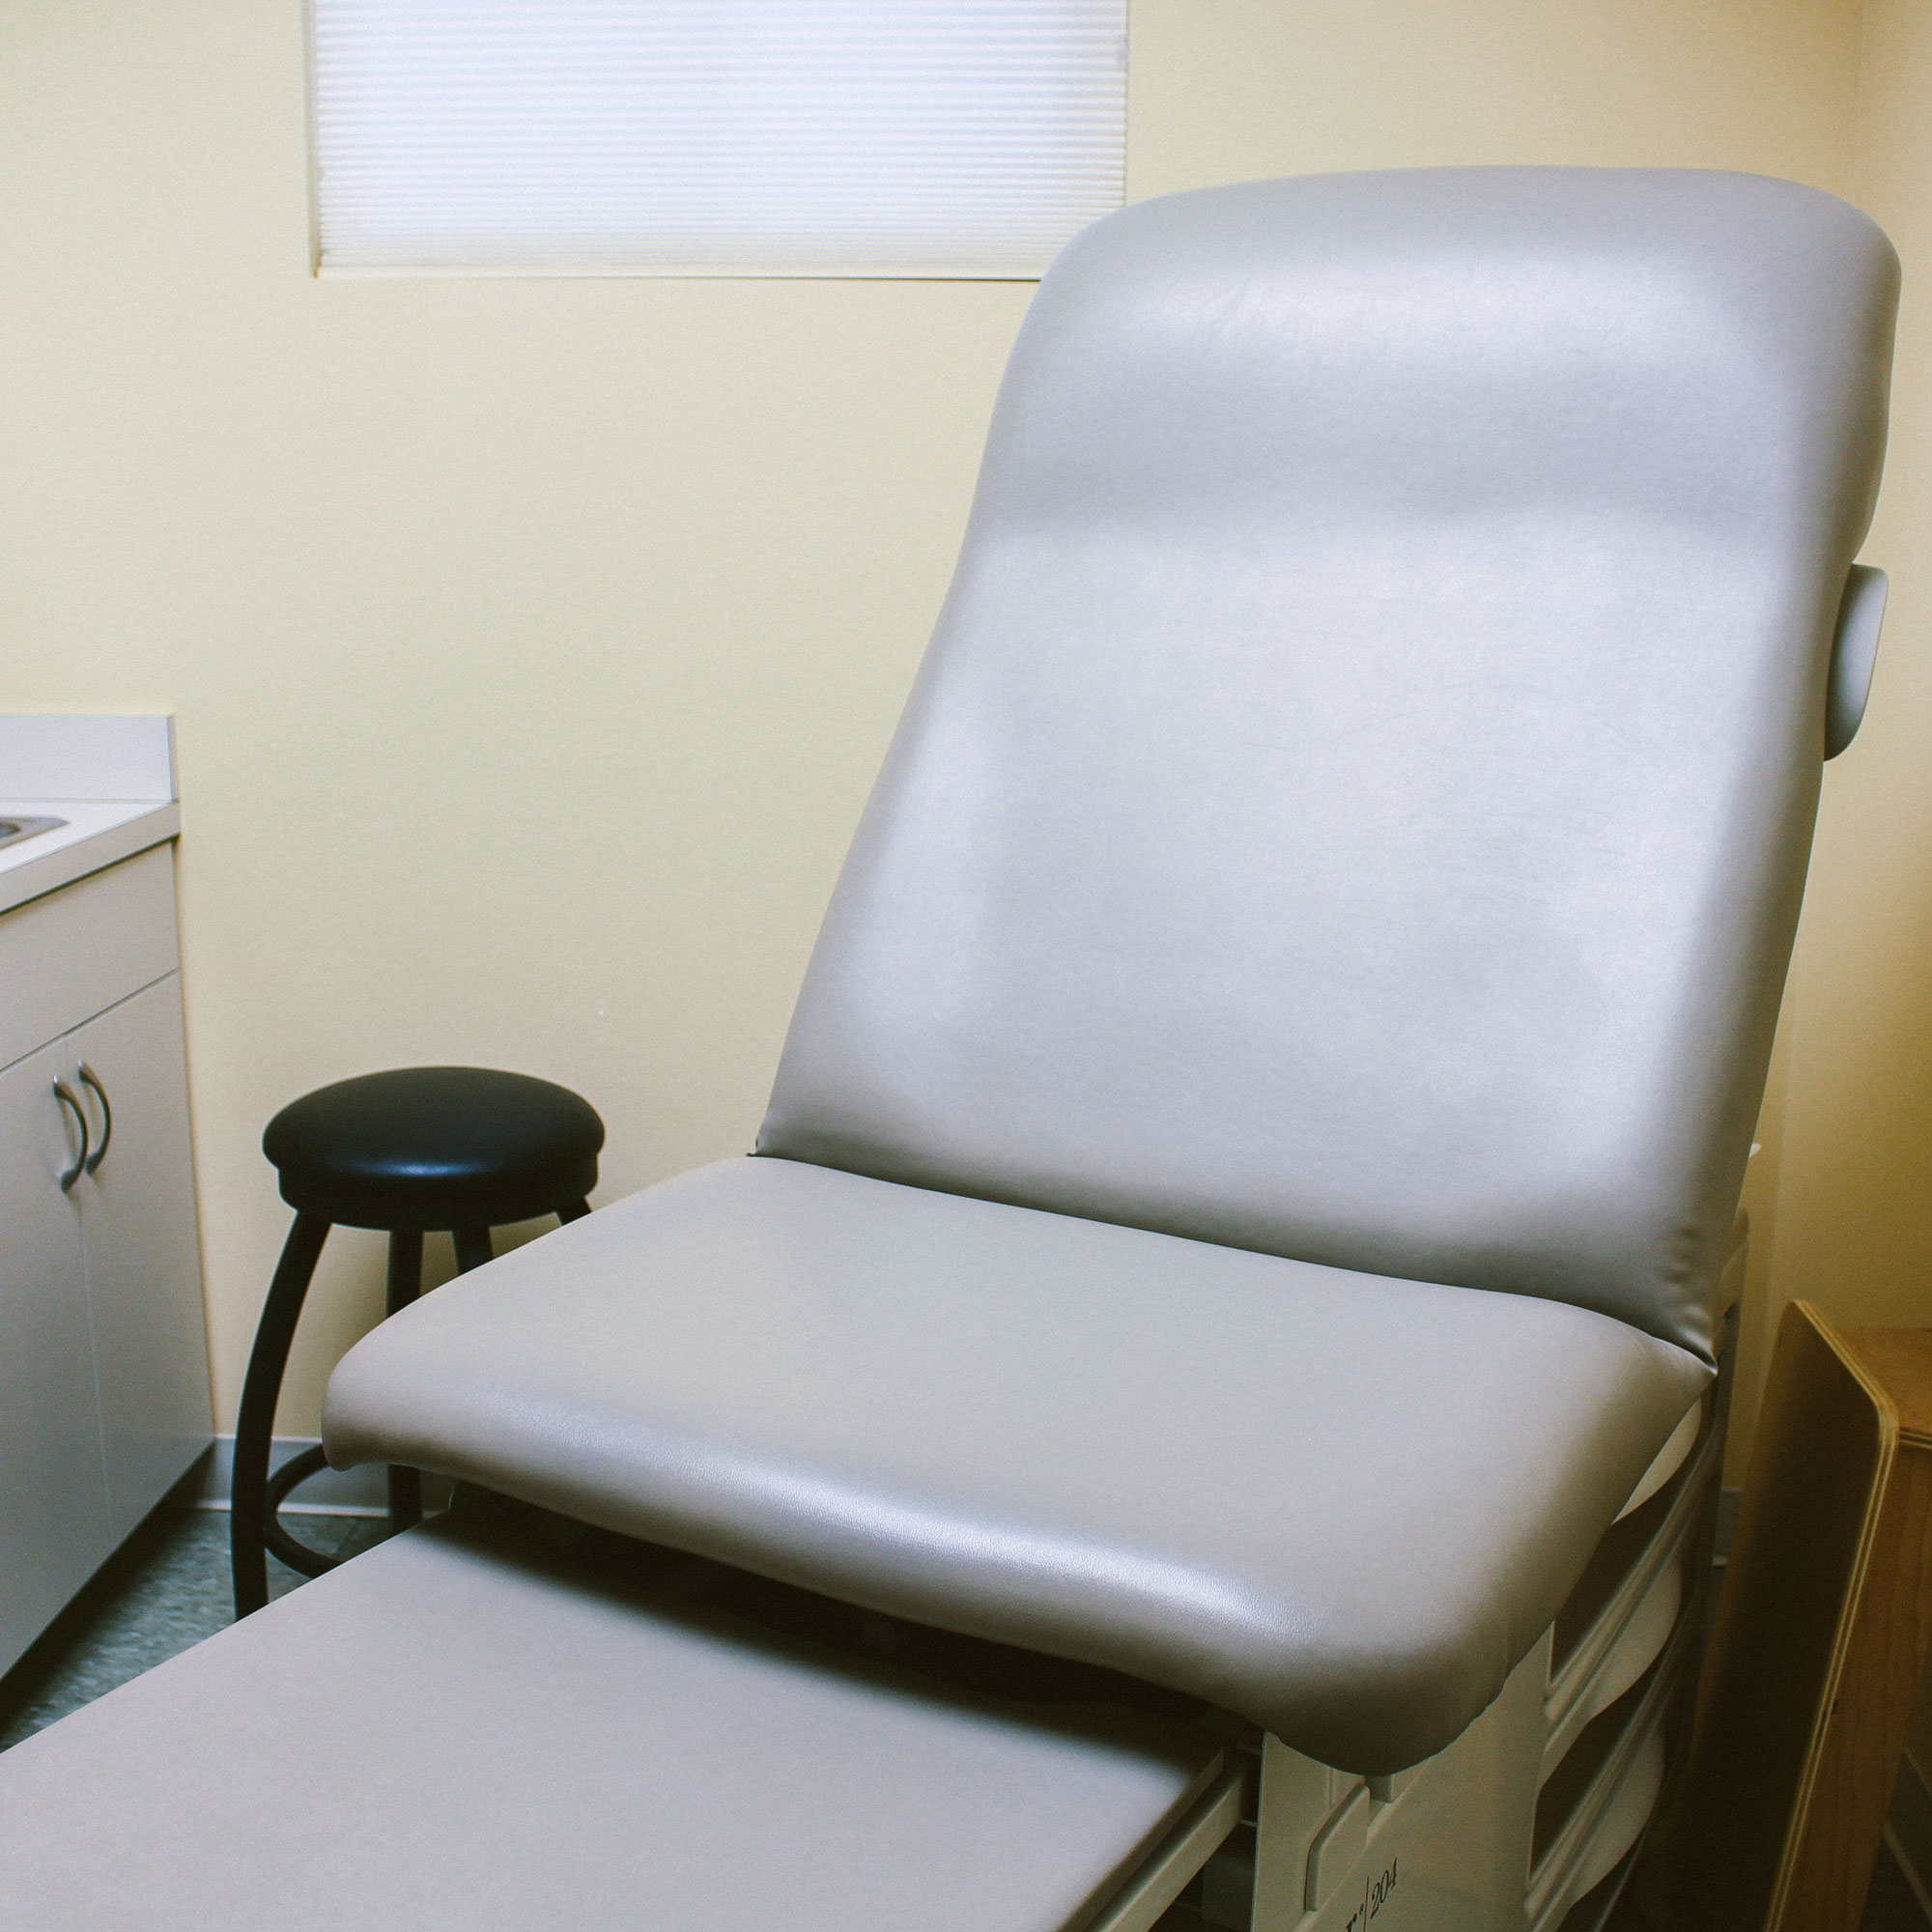 An image of a patient chair in a patient room.